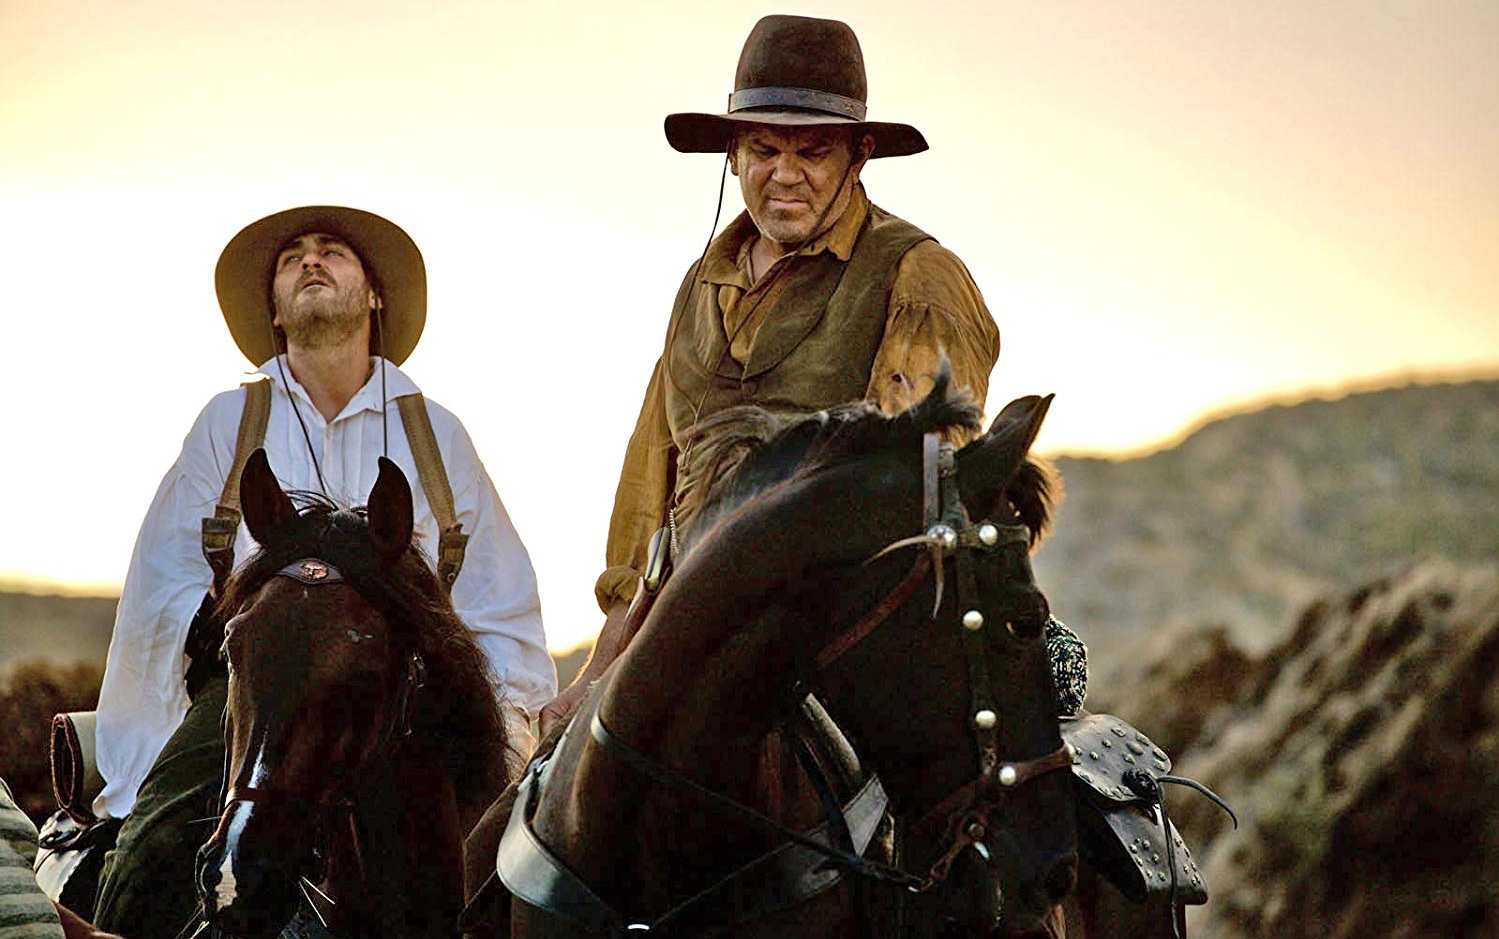 THE SISTERS BROTHERS Makes an Impression with Well-Drawn Characters